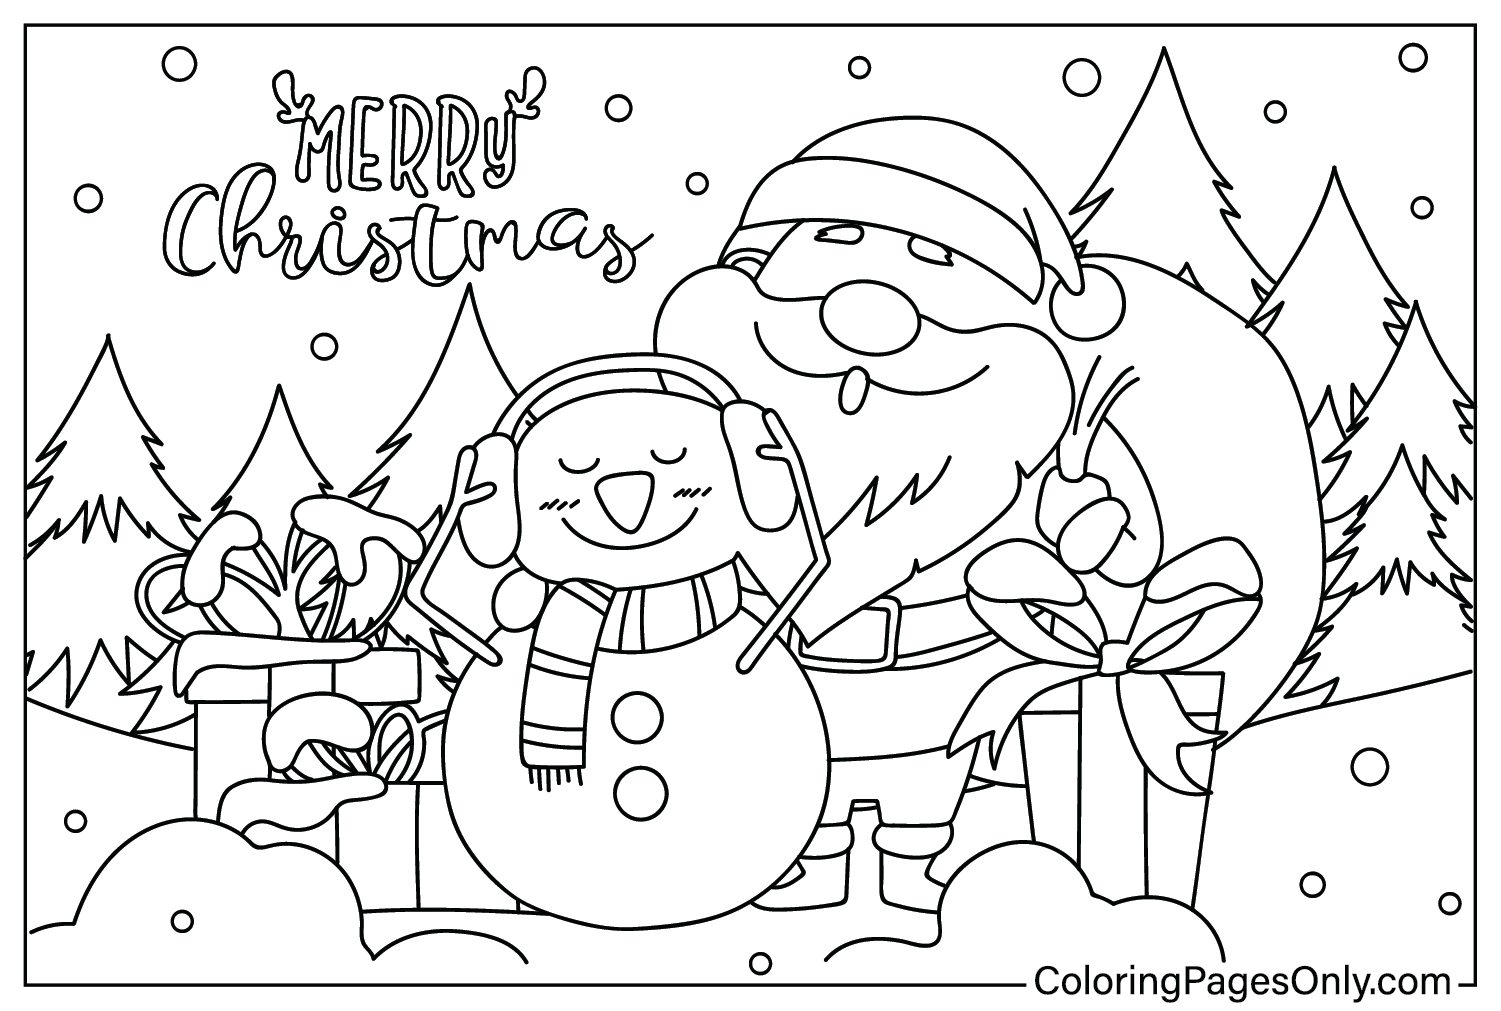 Free Christmas Wallpaper Coloring Page from Christmas Wallpaper